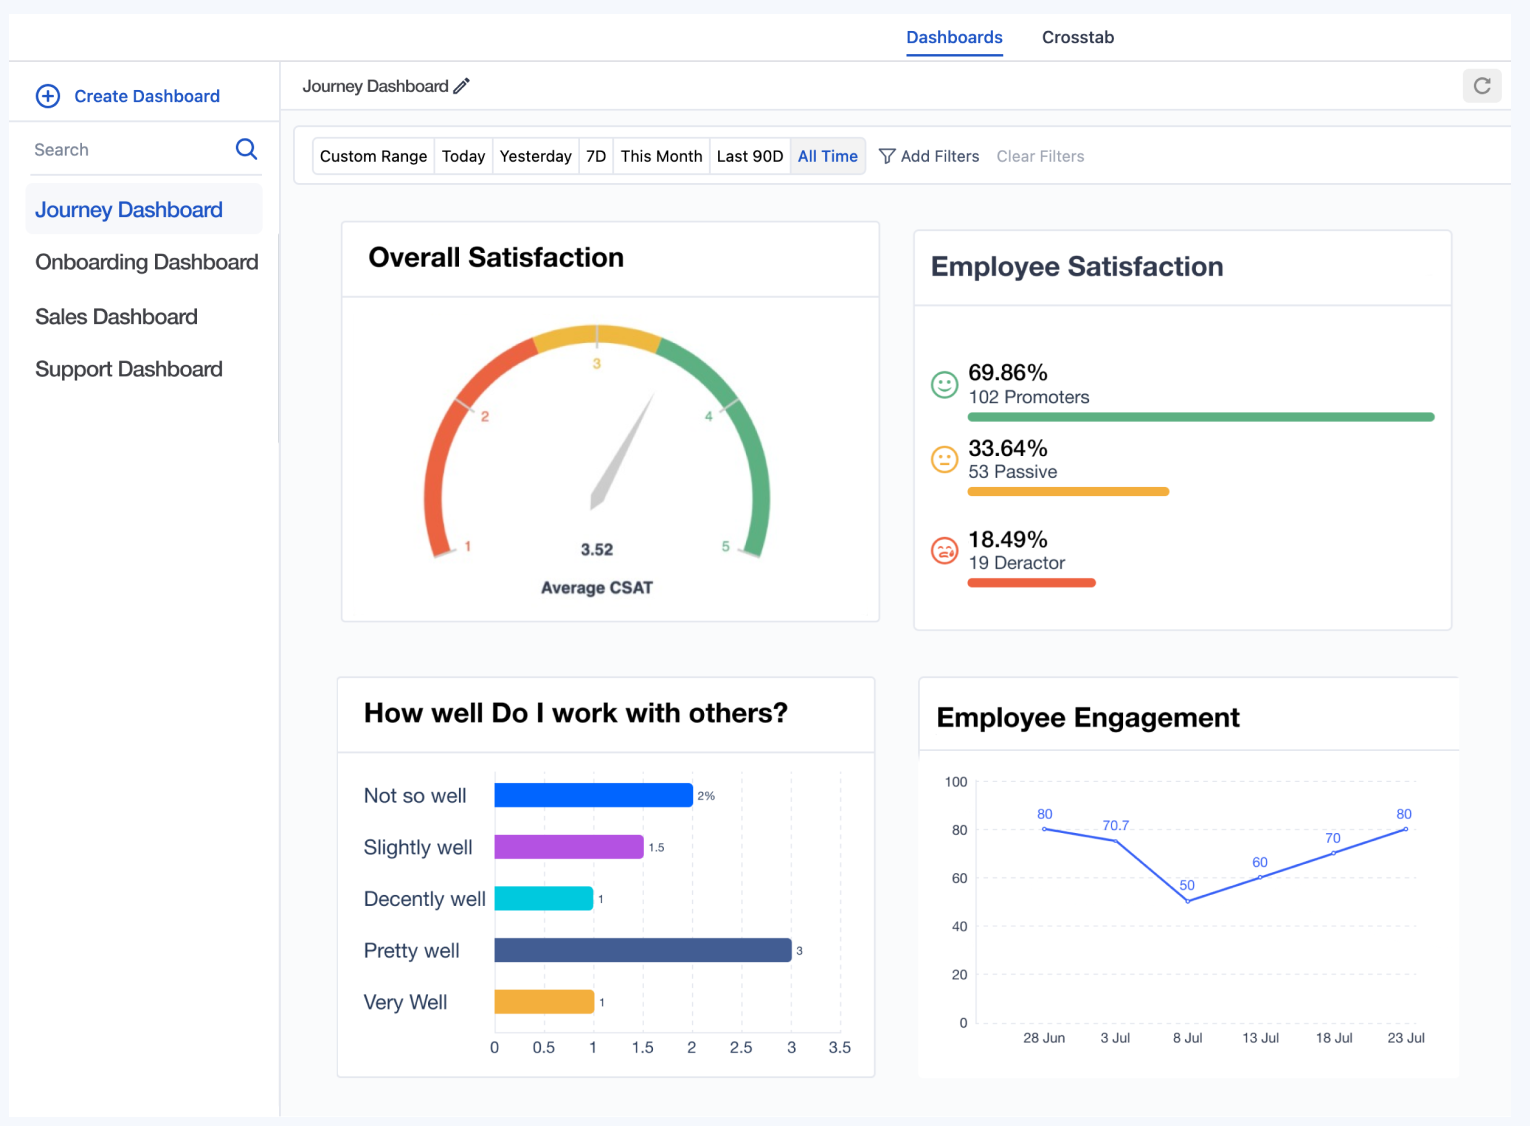  This is the image of the customer dashboard of SurveySensum for an employee engagement survey. 